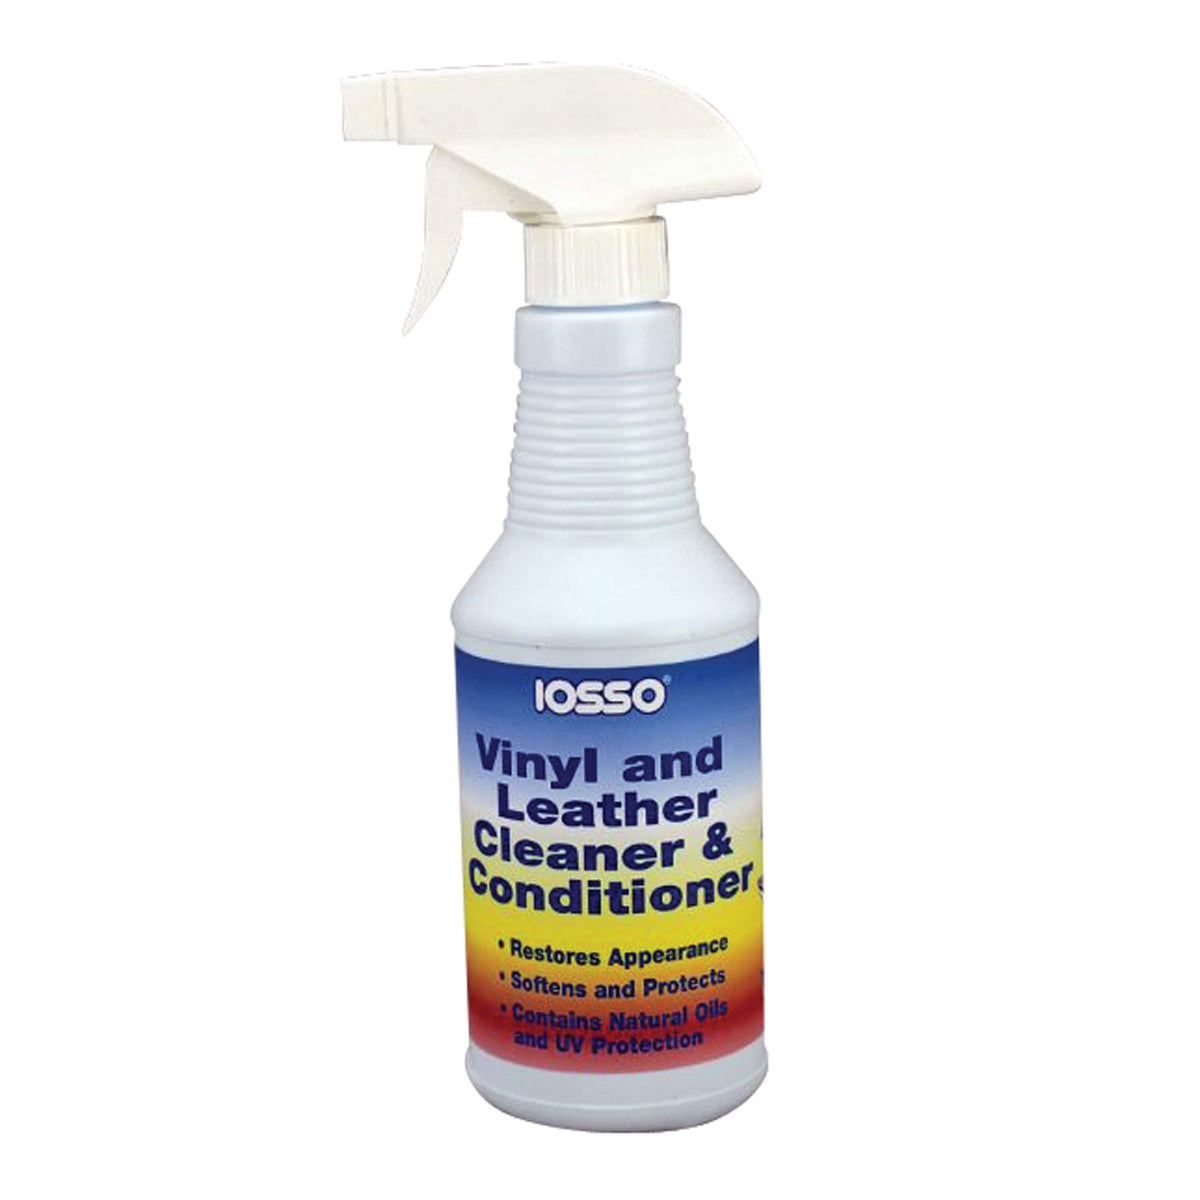 Iosso Vinyl and Leather Cleaner and Conditioner-Gallon #10120